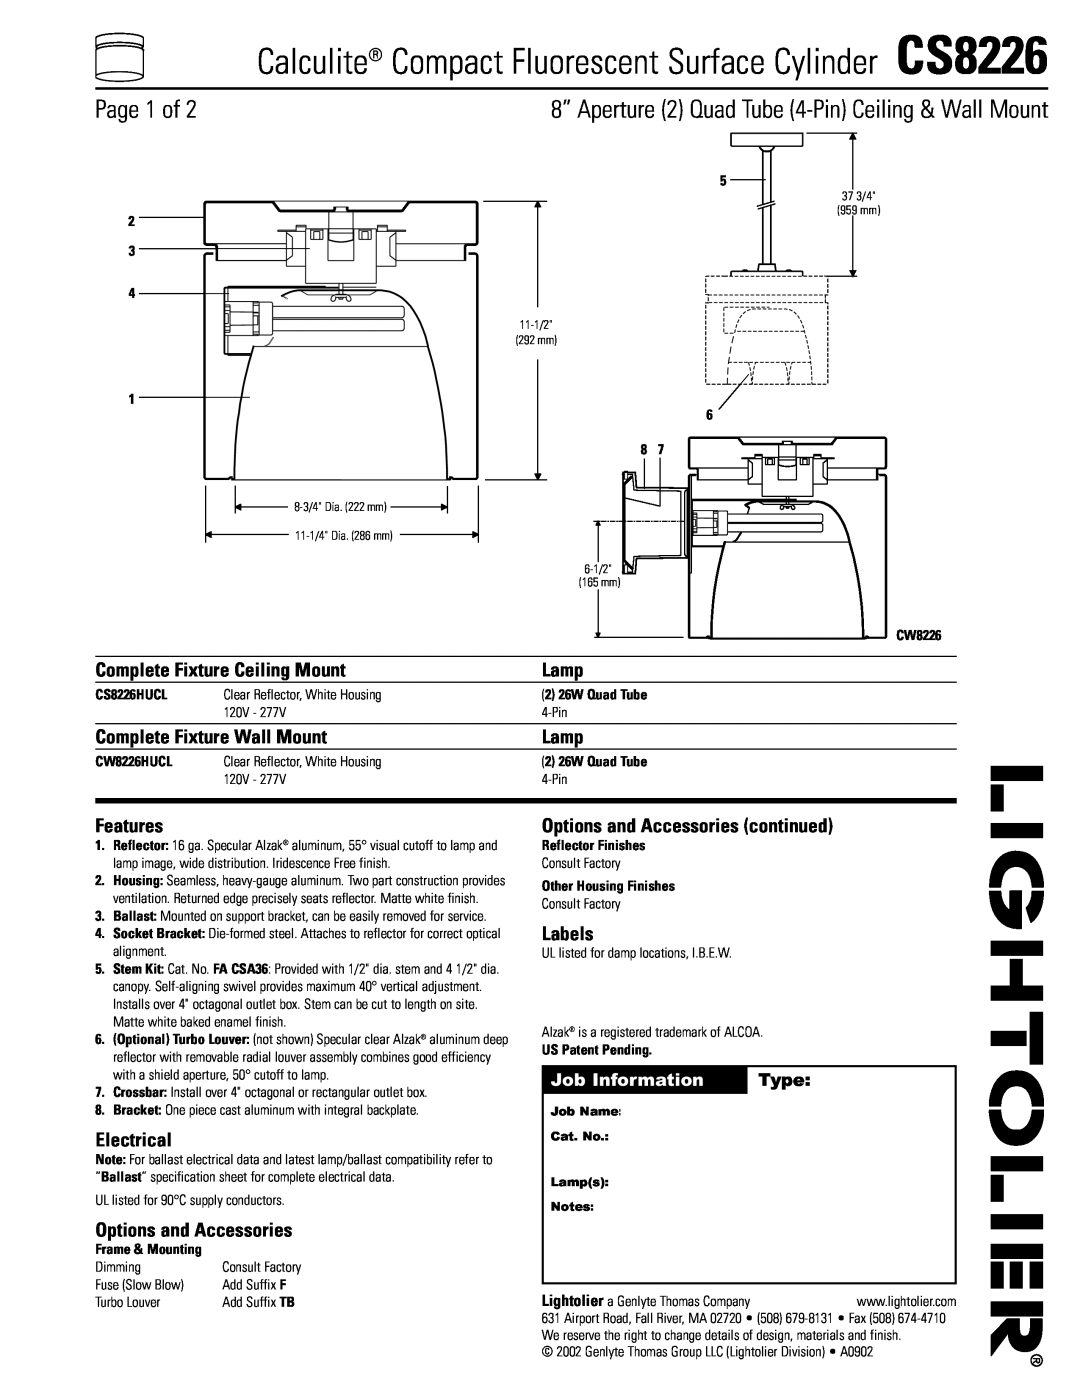 Lightolier CS8226 specifications Page 1 of, 8” Aperture 2 Quad Tube 4-PinCeiling & Wall Mount, Job Information, Type, Lamp 